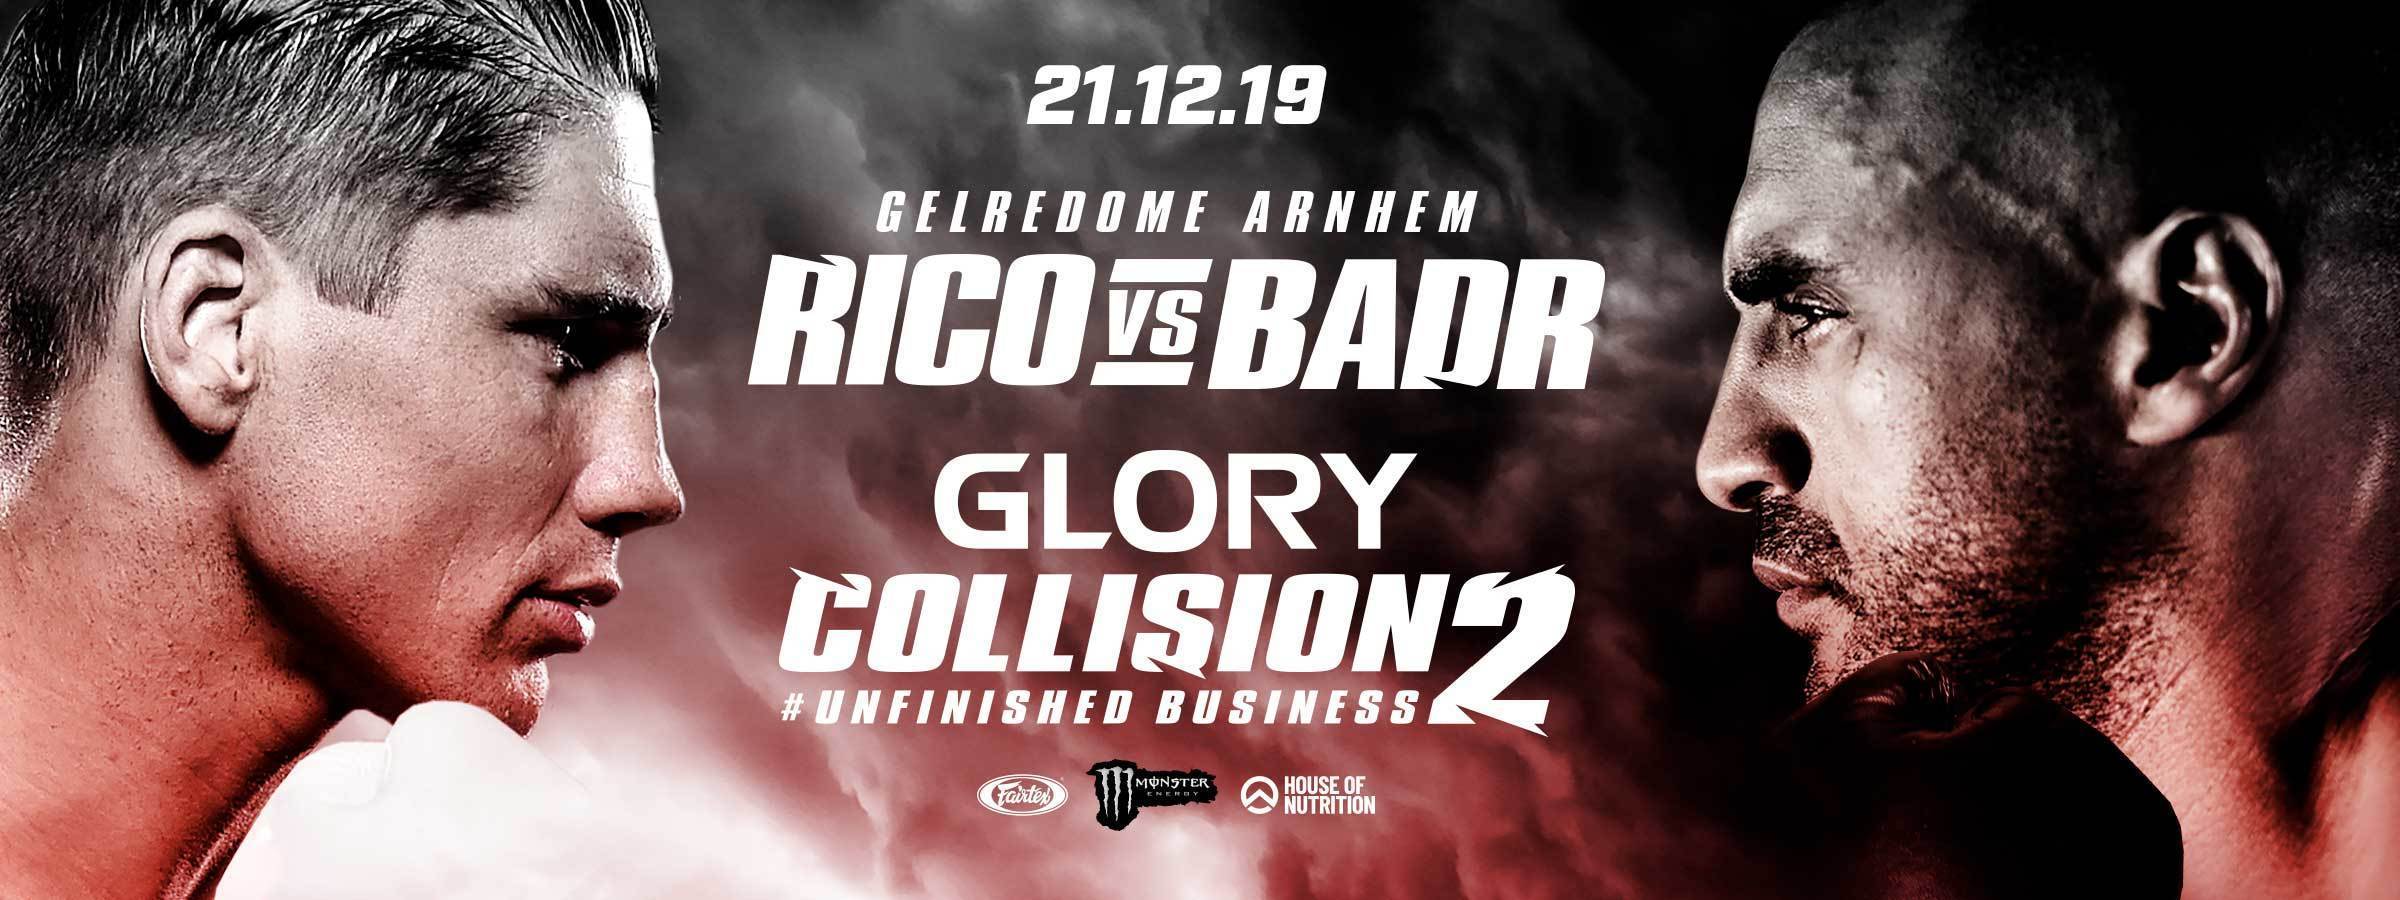 GLORY: COLLISION 2 GENERAL SALE COMMENCES WEDNESDAY